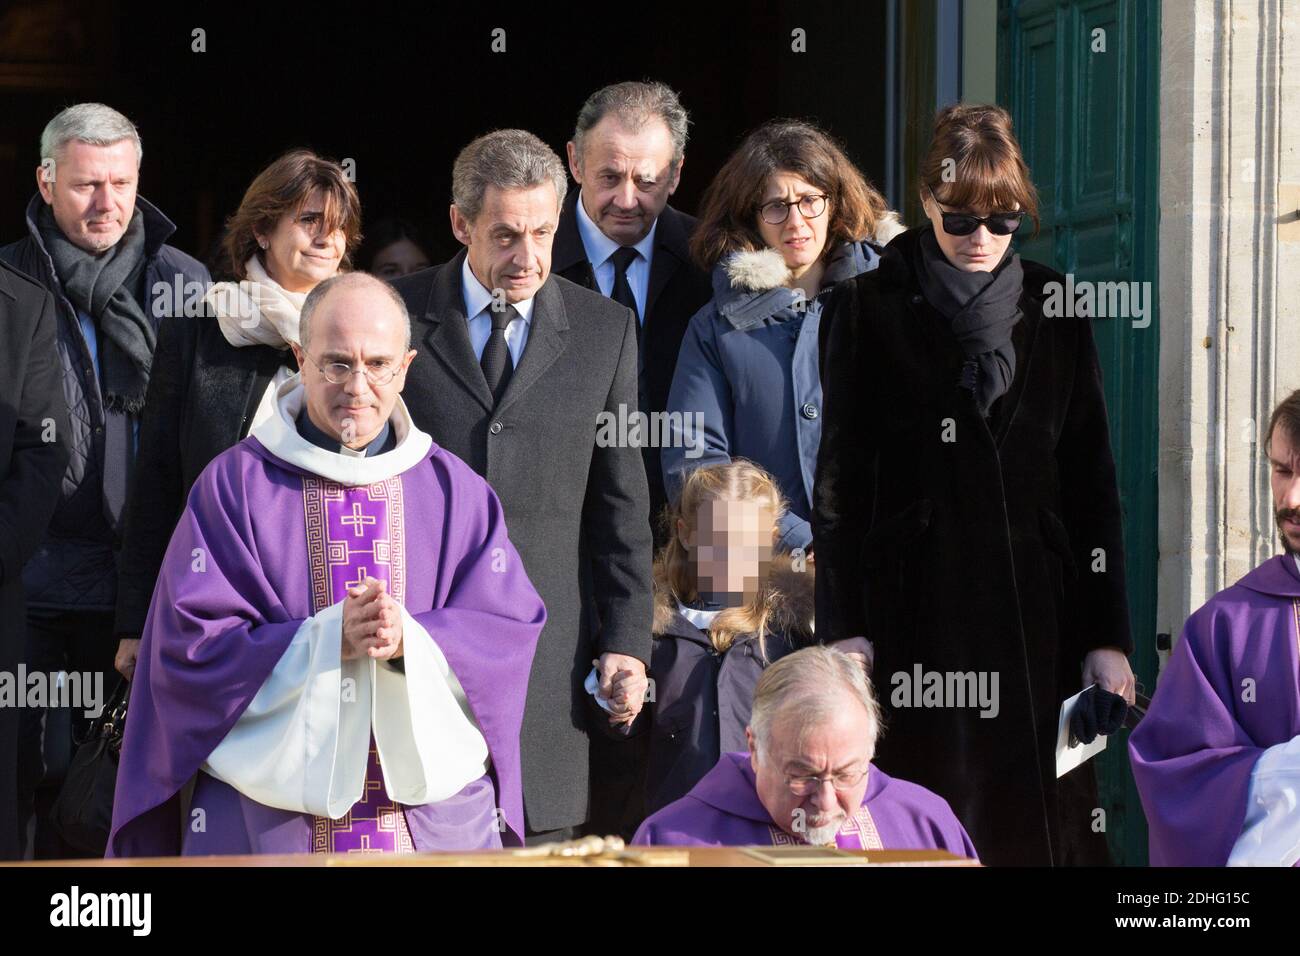 Nicolas Sarkozy, his wife Carla Bruni-Sarkozy and their daughter during the funeral of Andree Sarkozy aka Dadue, mother of Former French President Nicolas Sarkozy, at Saint-Jean-Baptiste church in Neuilly-Sur-Seine, France on December 18, 2017. Photo by ABACAPRESS.COM Stock Photo